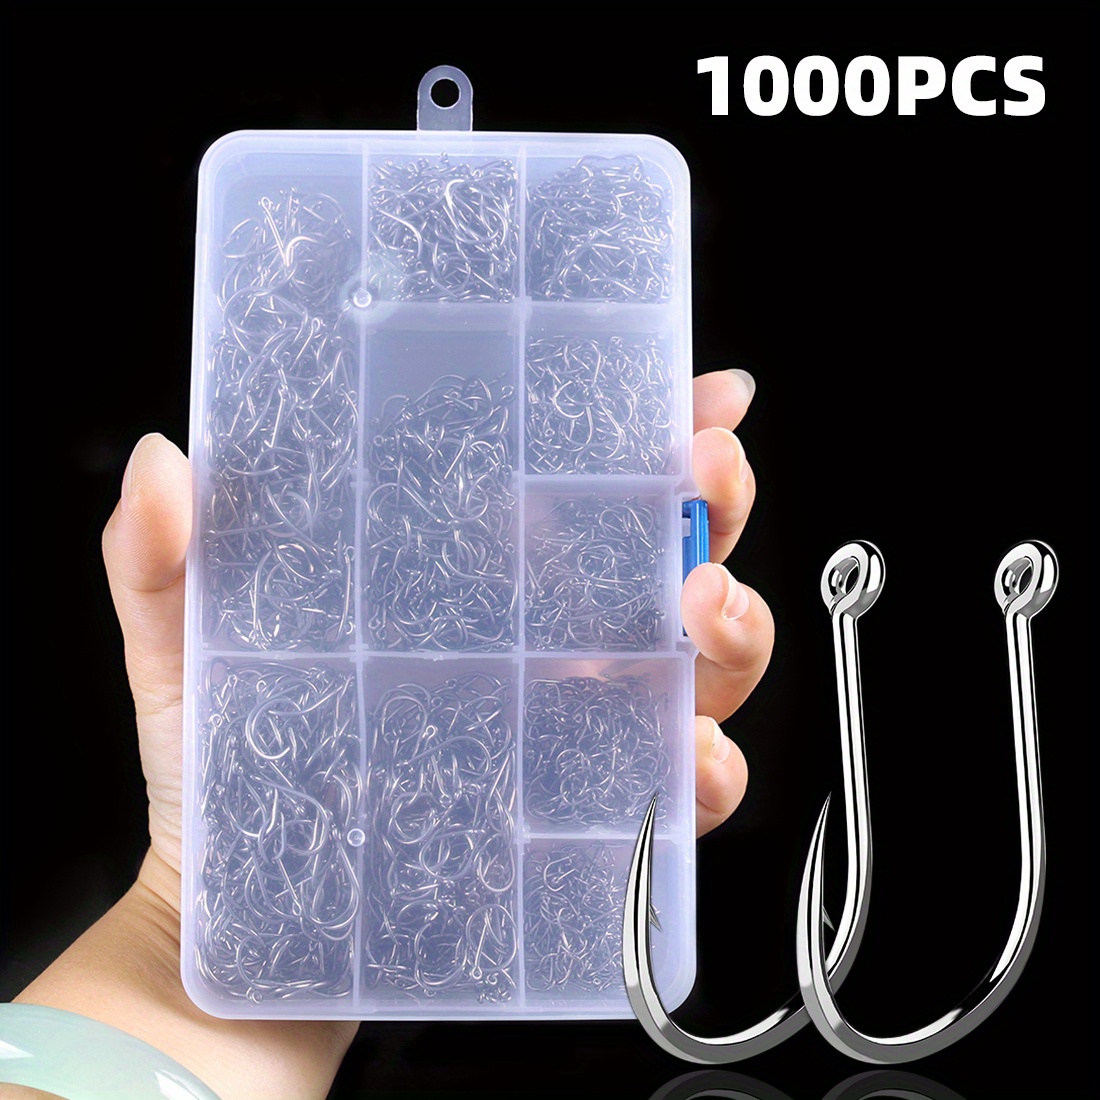  TOMYEUS Fishing Hooks Fishhooks Fishing Hook 20 pc/Lot High  Carbon Steel Hook with Dig Ring Bionic Invisible Aquatic Grass Barbed Hook  Fishing Tackle Fish Hooks (Model Number : 13) : Sports